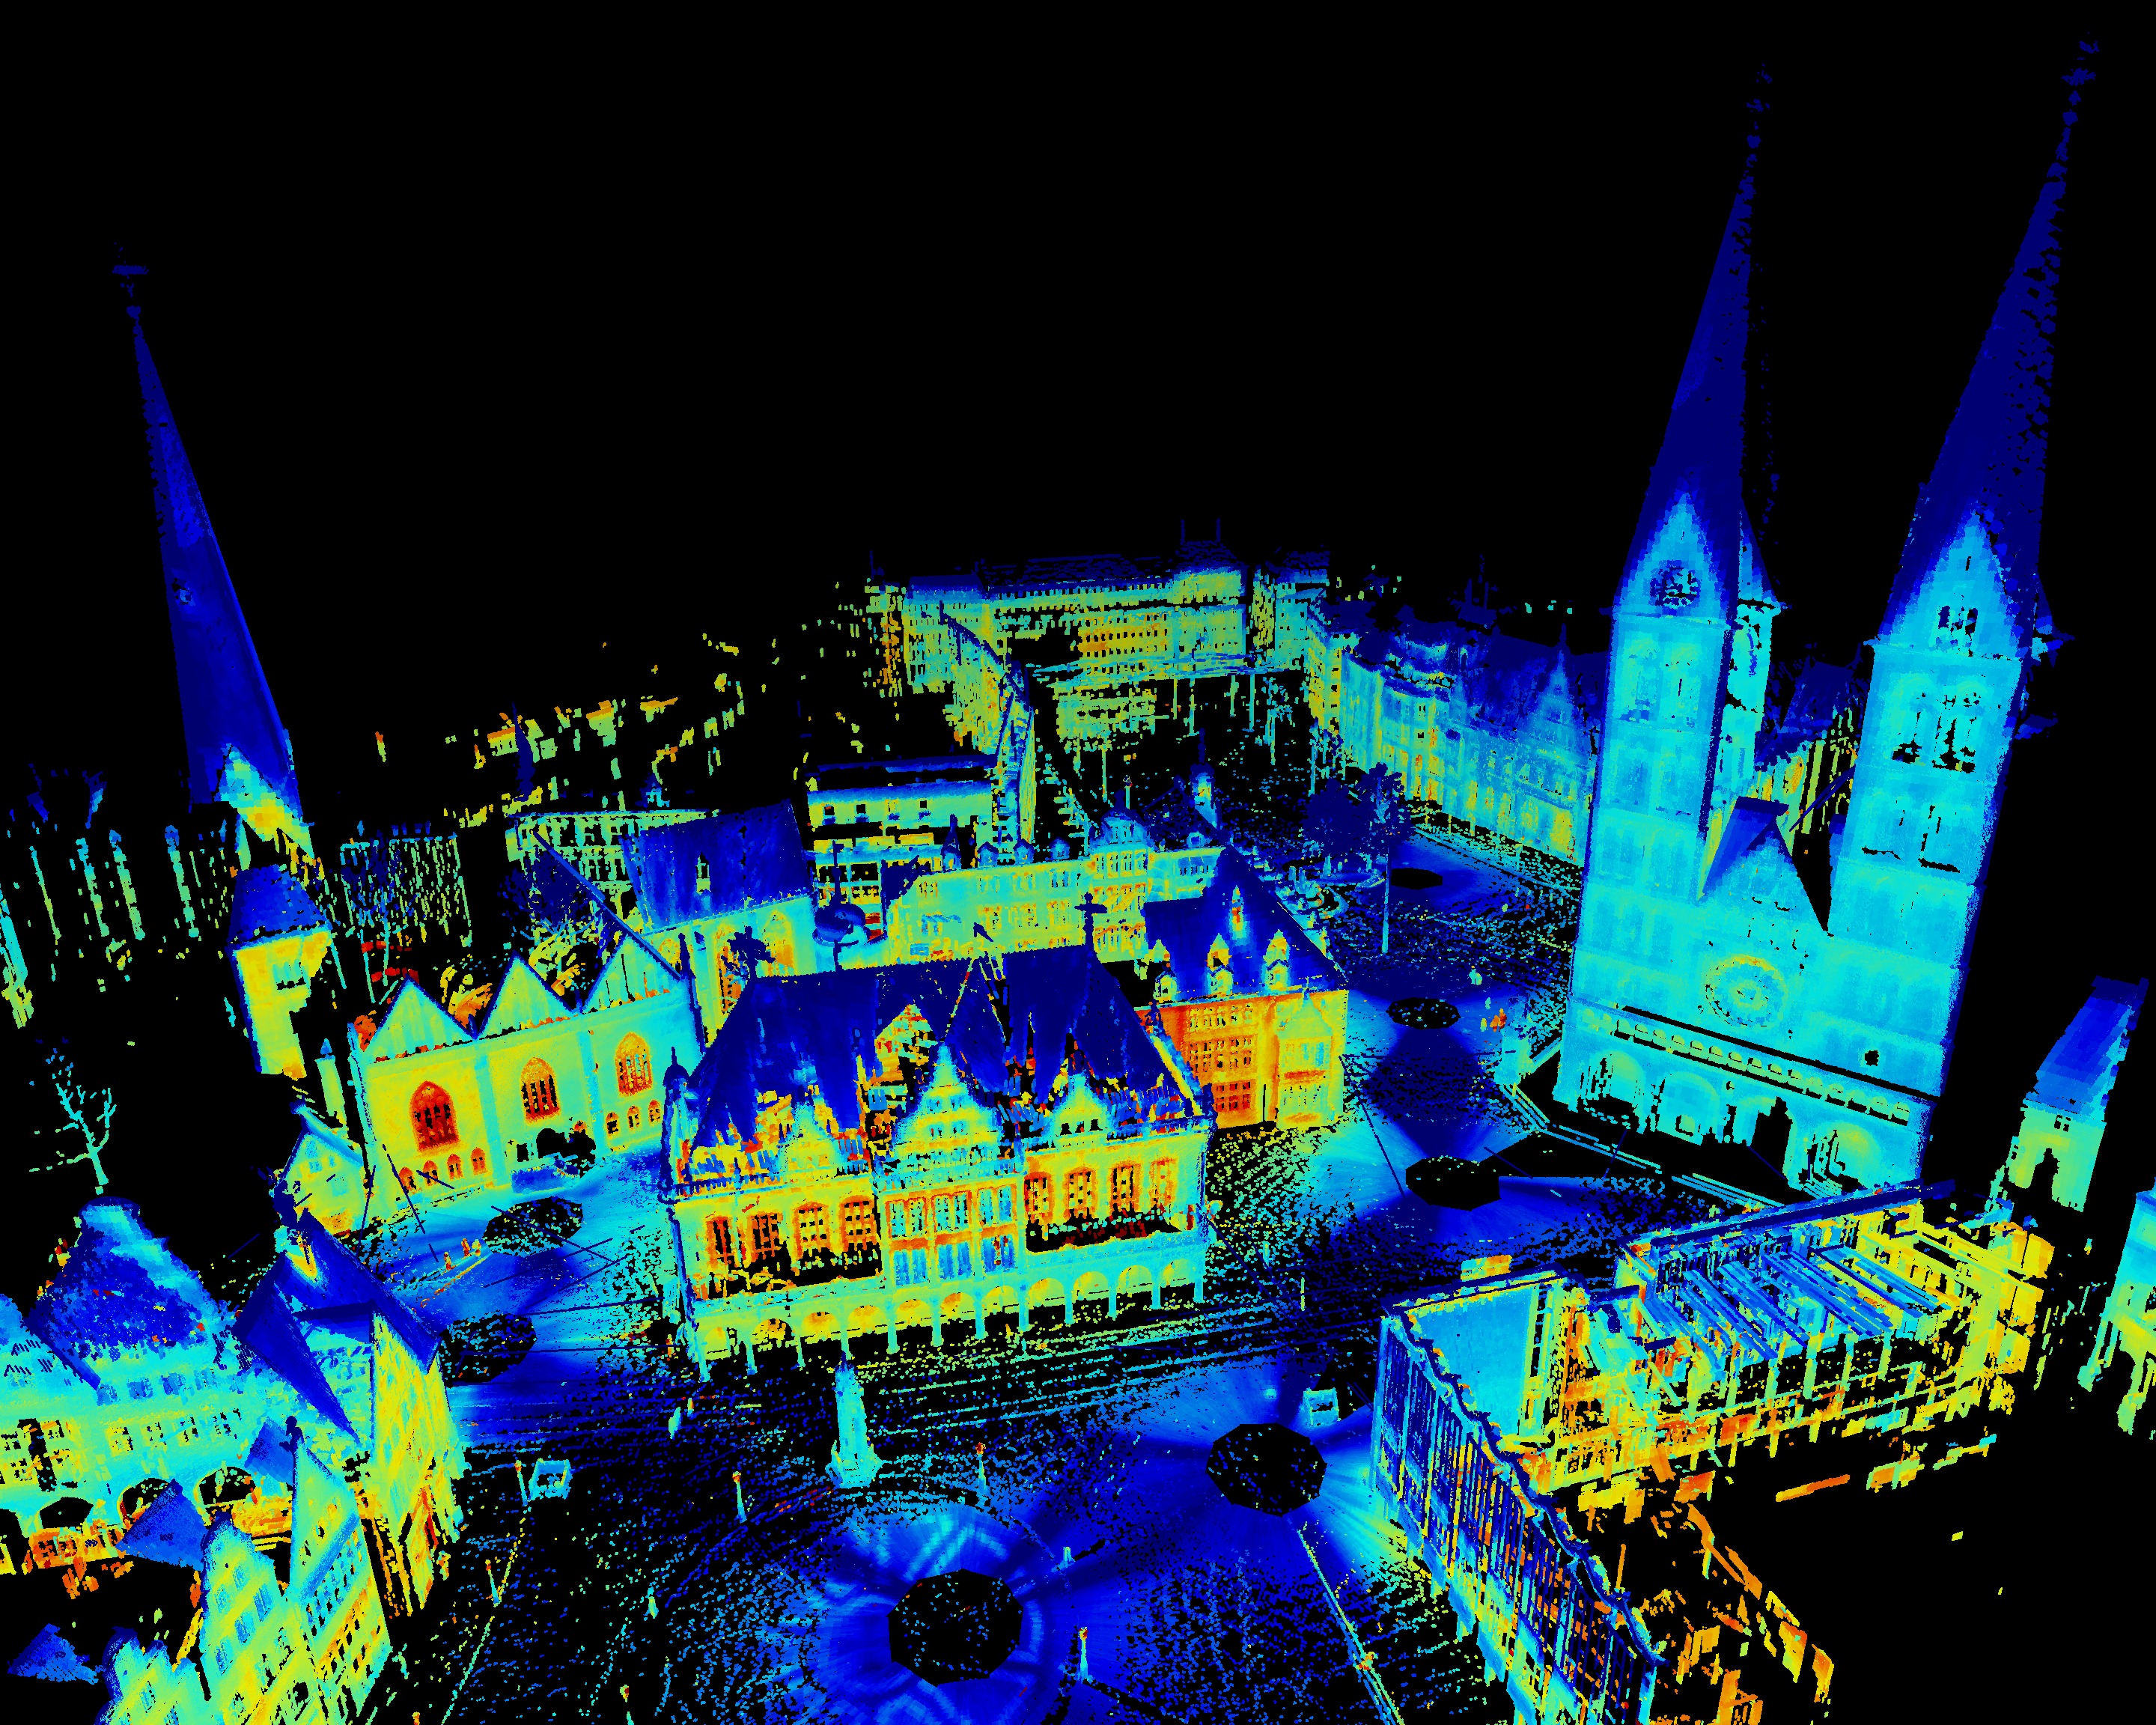 Thermal 3D Point Cloud of the City Center of Bremen